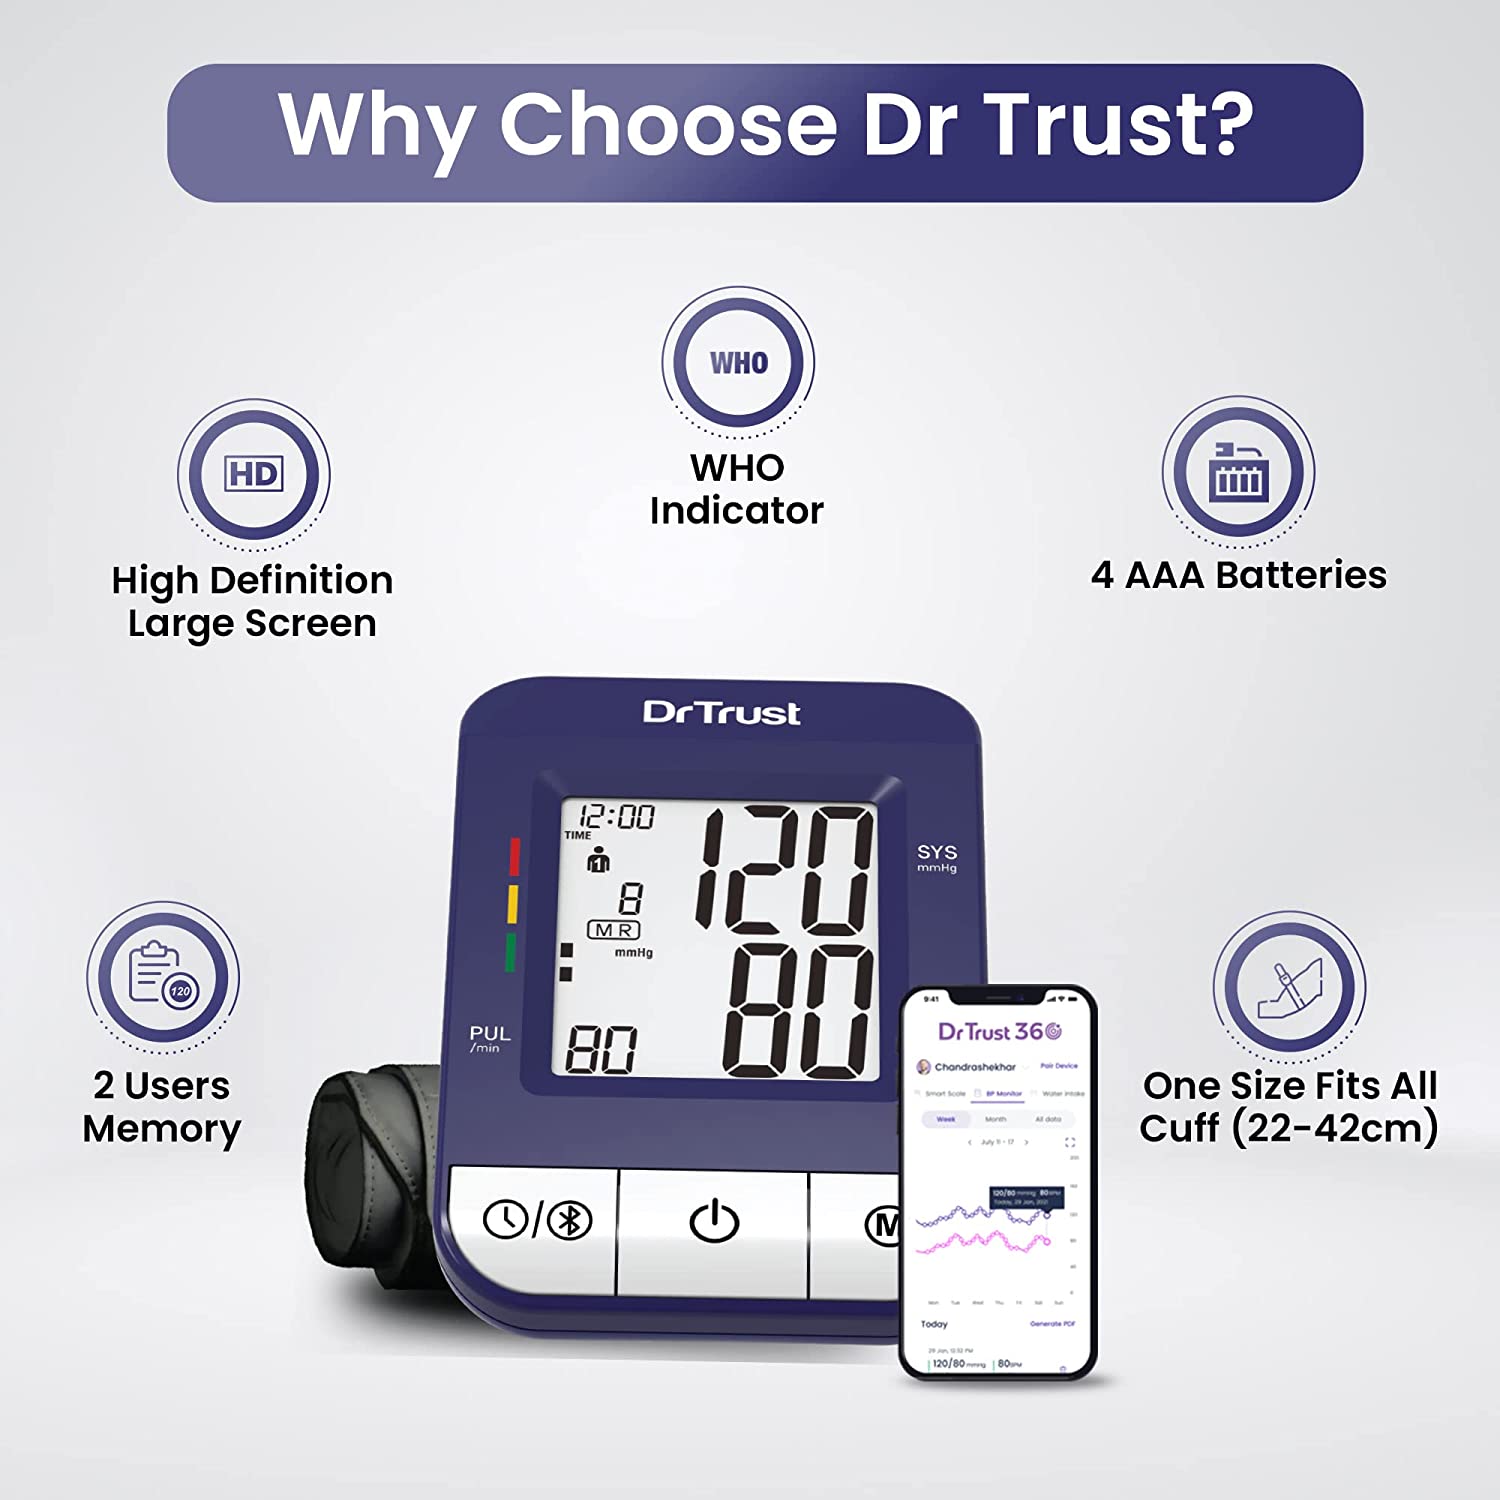 Dr-Trust-USA-Digital-Blood-Pressure-Monitor-Apparatus-and-Testing-Machine-with-USB-Port-Icheck-Bluetooth-Connect-Most-Accurate-BP-Checking-Instrument2.jpg